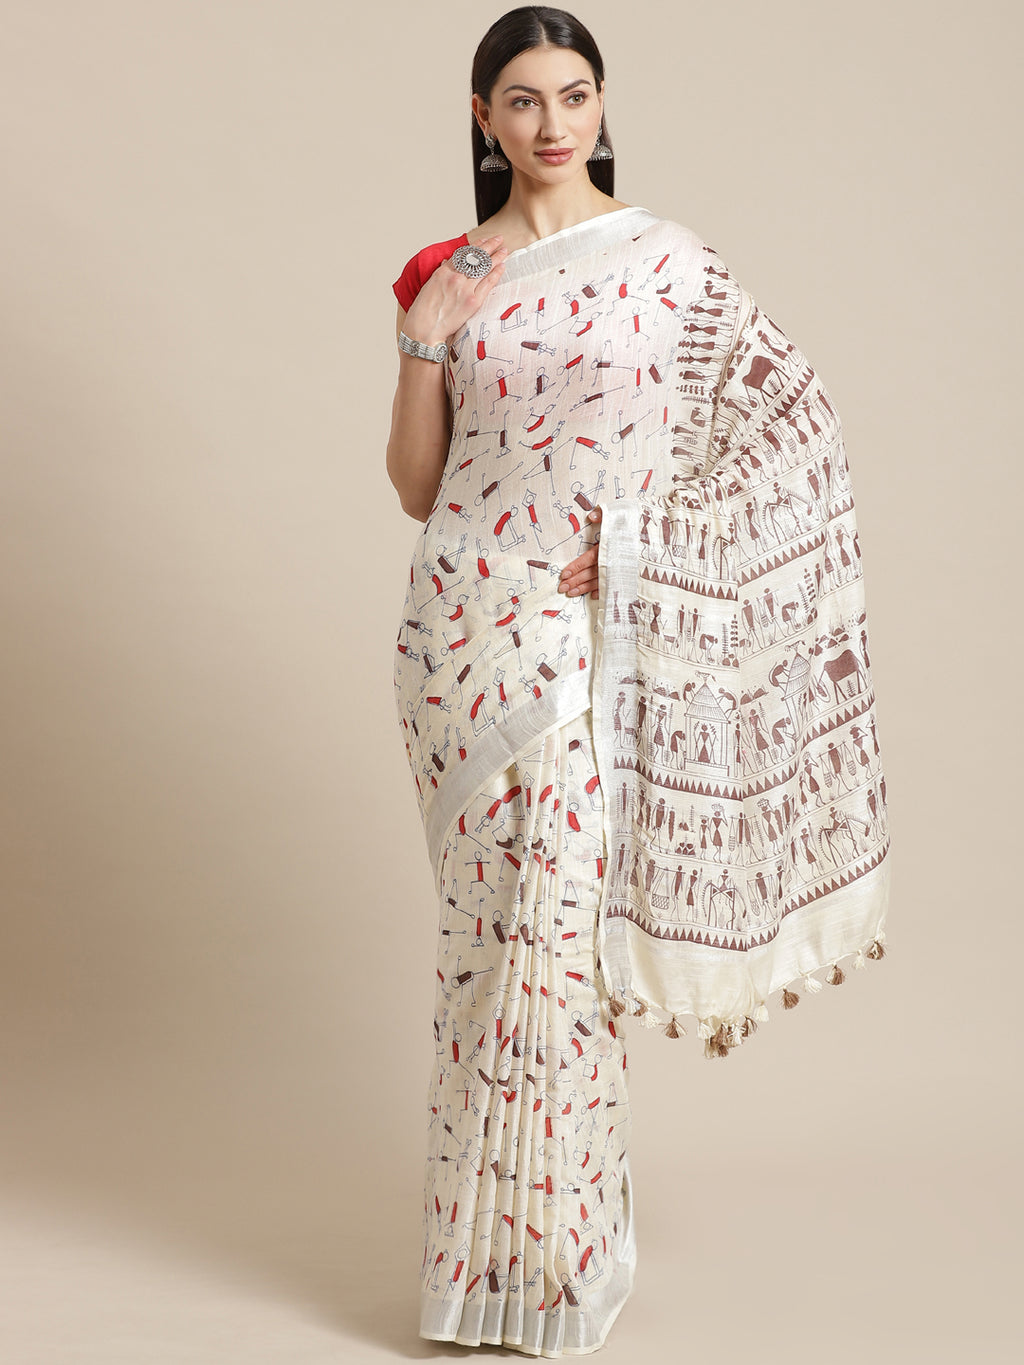 Off White and Brown, Kalakari India Linen Off White Hand crafted saree with blouse ALBGSA0097-Saree-Kalakari India-ALBGSA0097-Cotton, Geographical Indication, Hand Crafted, Heritage Prints, Linen, Natural Dyes, Red, Sarees, Shibori, Sustainable Fabrics, Woven, Yellow-[Linen,Ethnic,wear,Fashionista,Handloom,Handicraft,Indigo,blockprint,block,print,Cotton,Chanderi,Blue, latest,classy,party,bollywood,trendy,summer,style,traditional,formal,elegant,unique,style,hand,block,print, dabu,booti,gift,prese